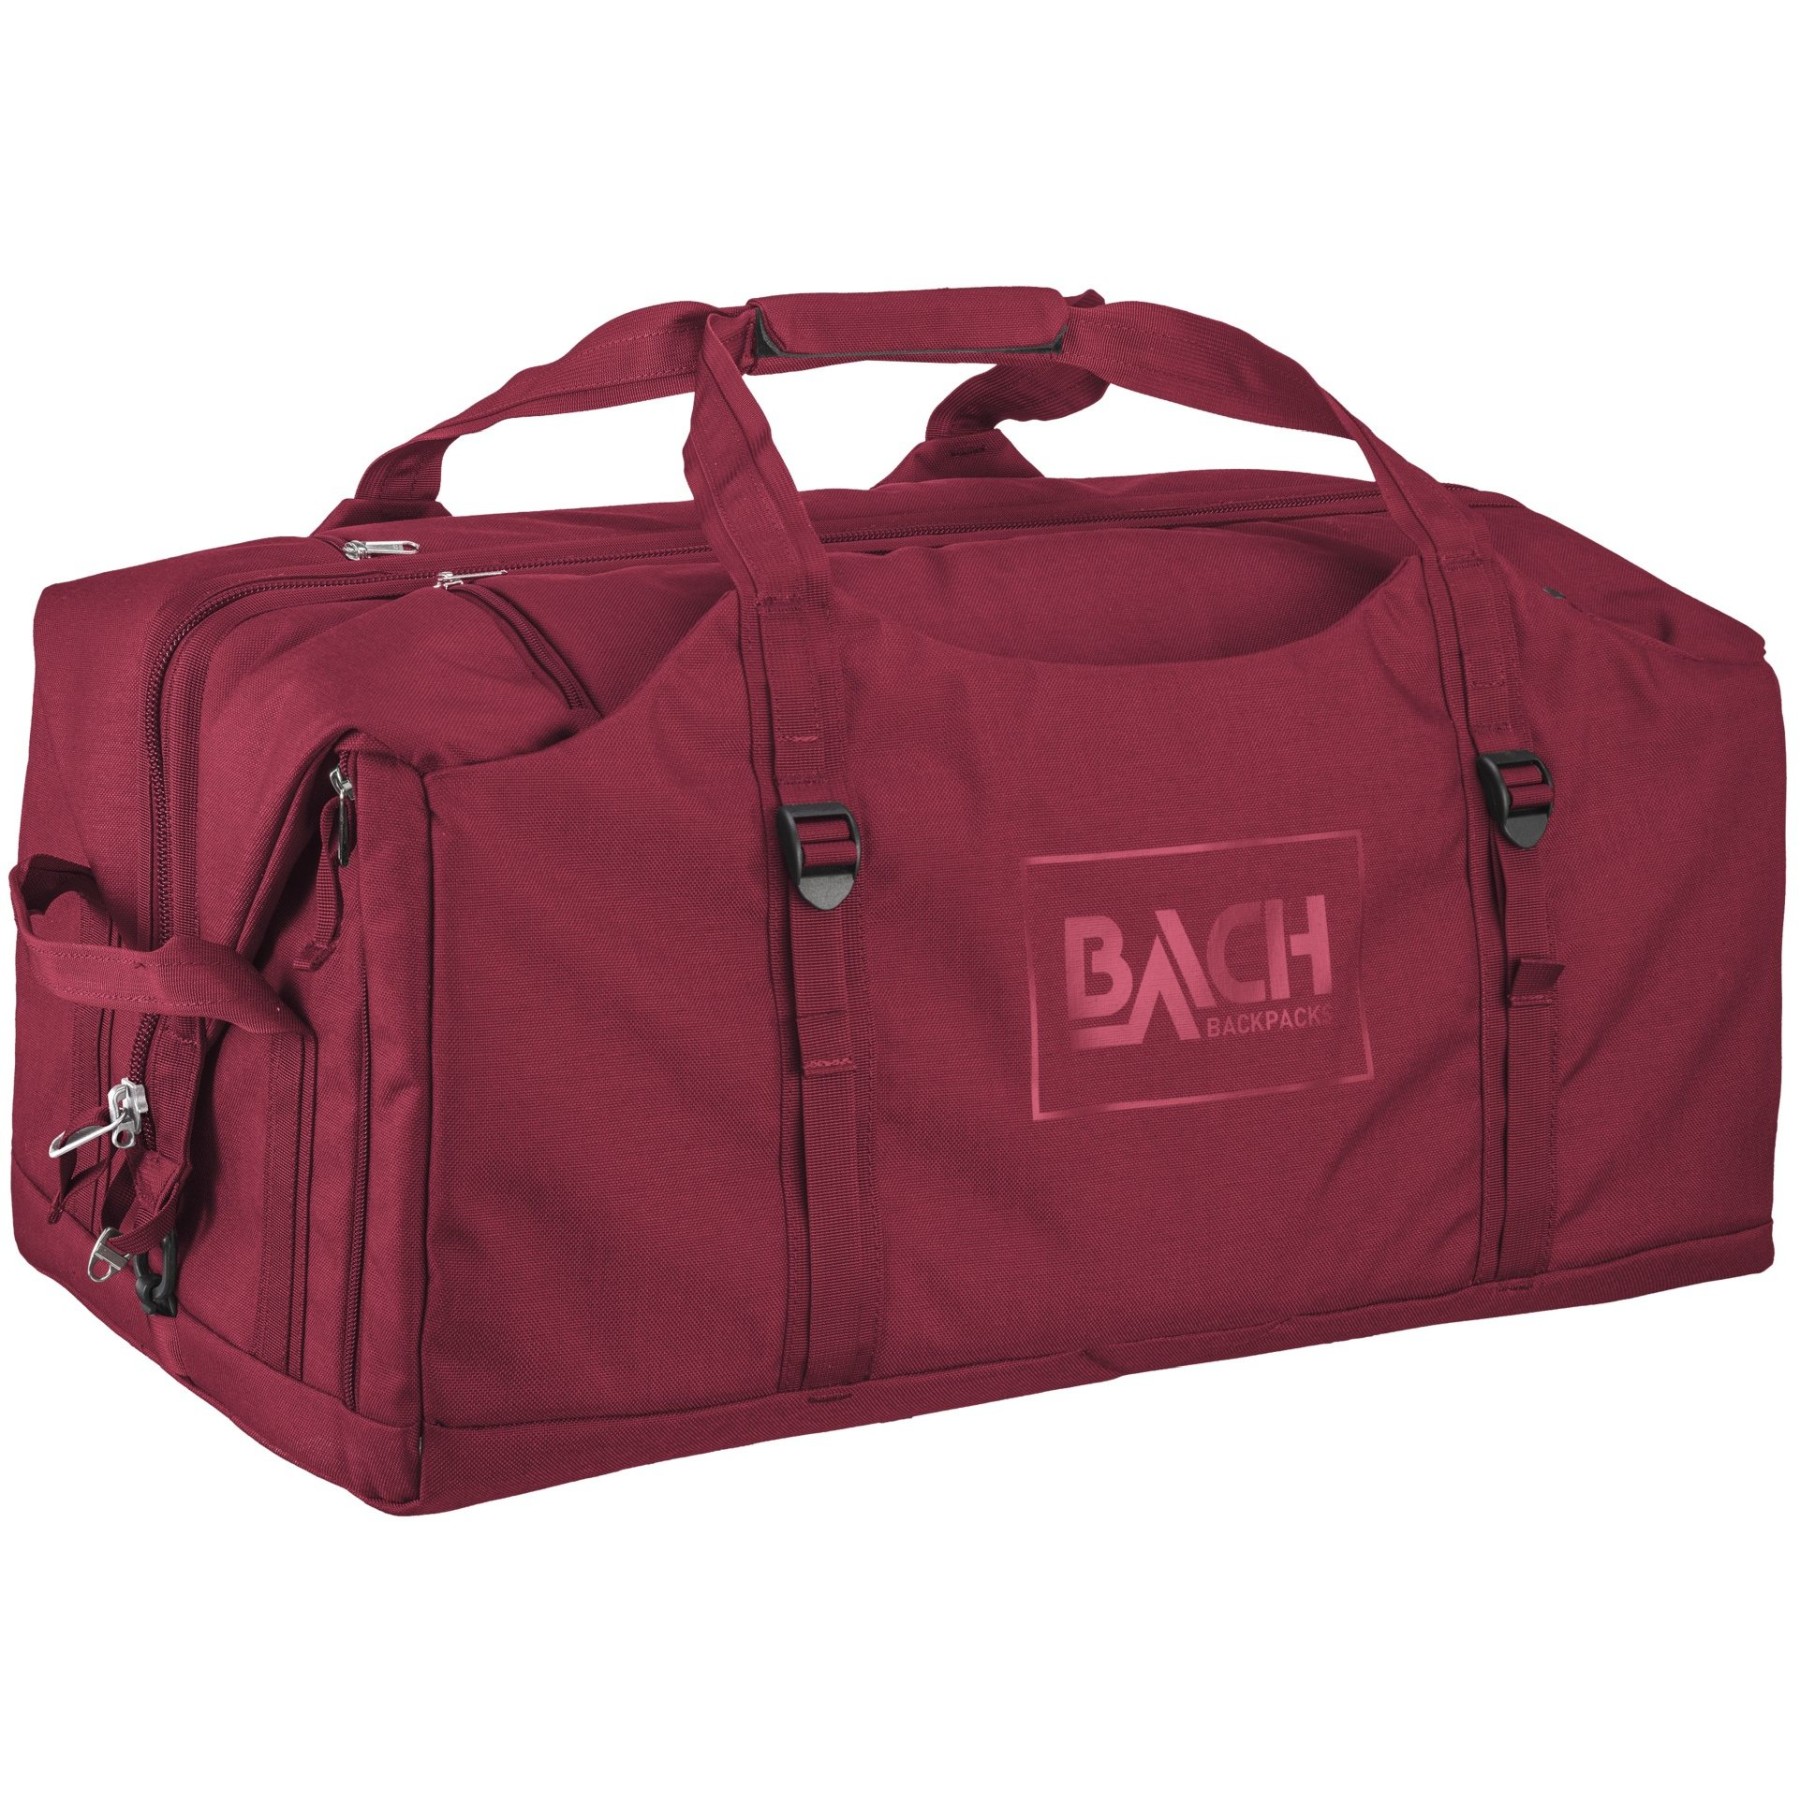 Picture of Bach Dr. Duffel 70 Travel Bag - red